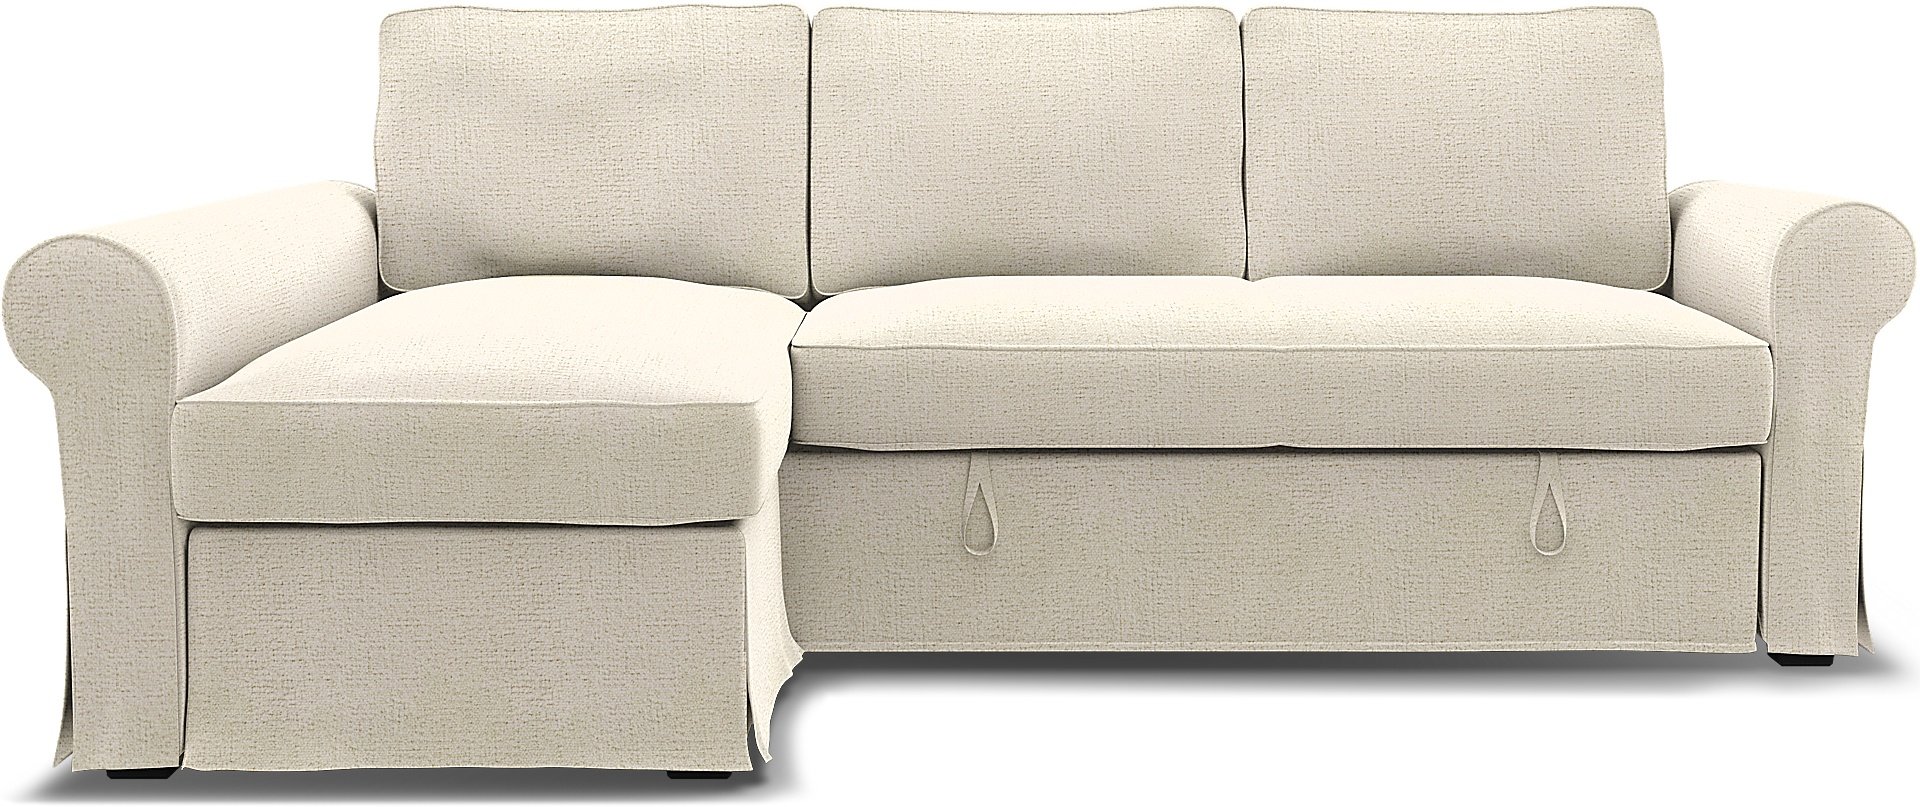 IKEA - Backabro Sofabed with Chaise Cover, Ecru, Boucle & Texture - Bemz